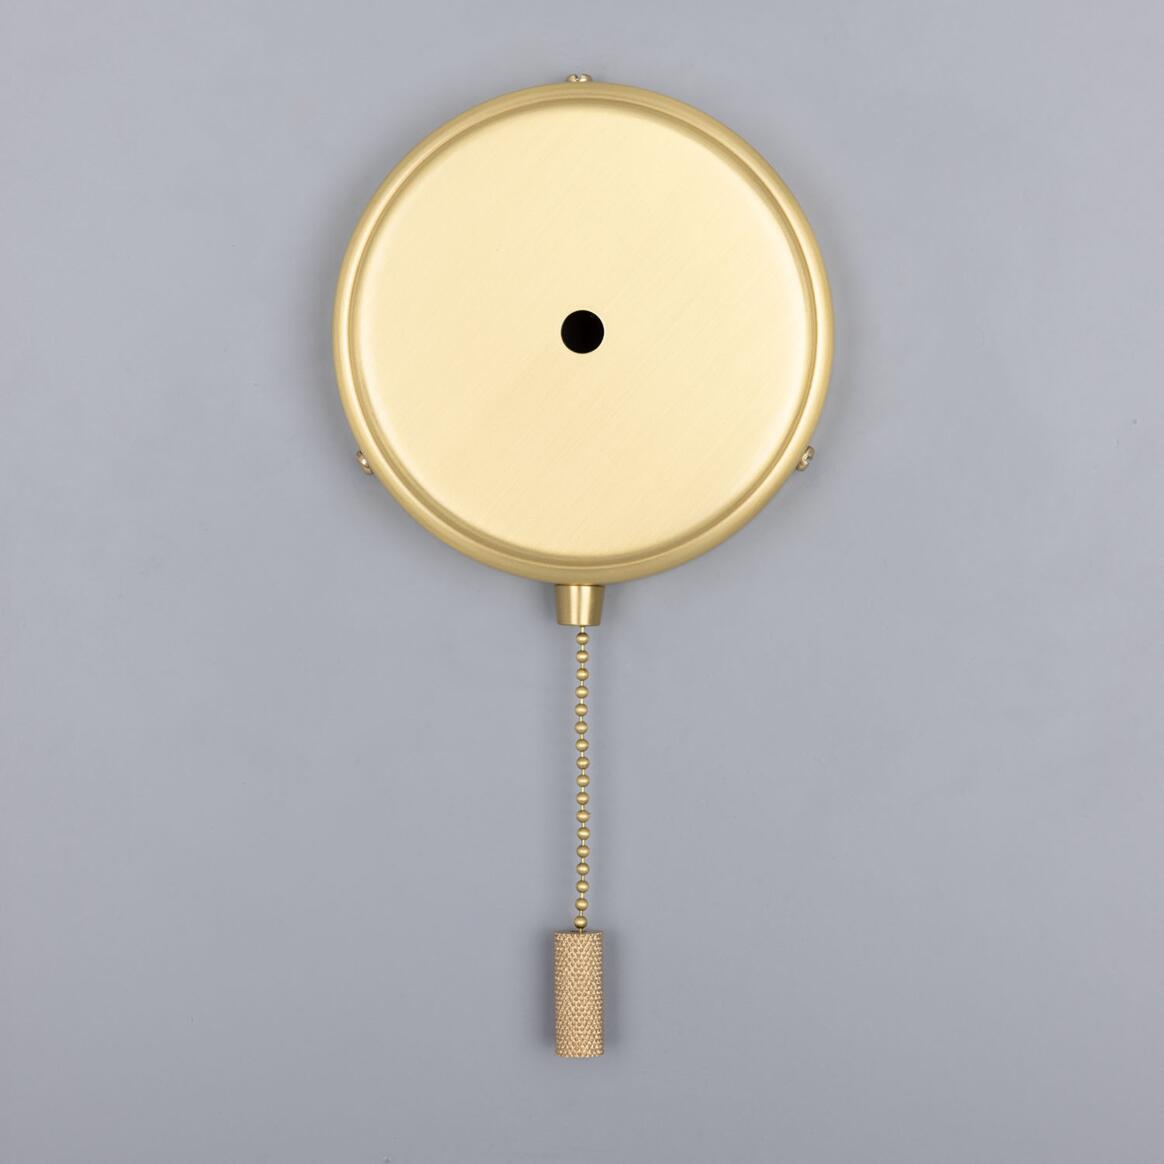 Pressed Brass Wall Bracket with Pull Switch 4.7" main product image